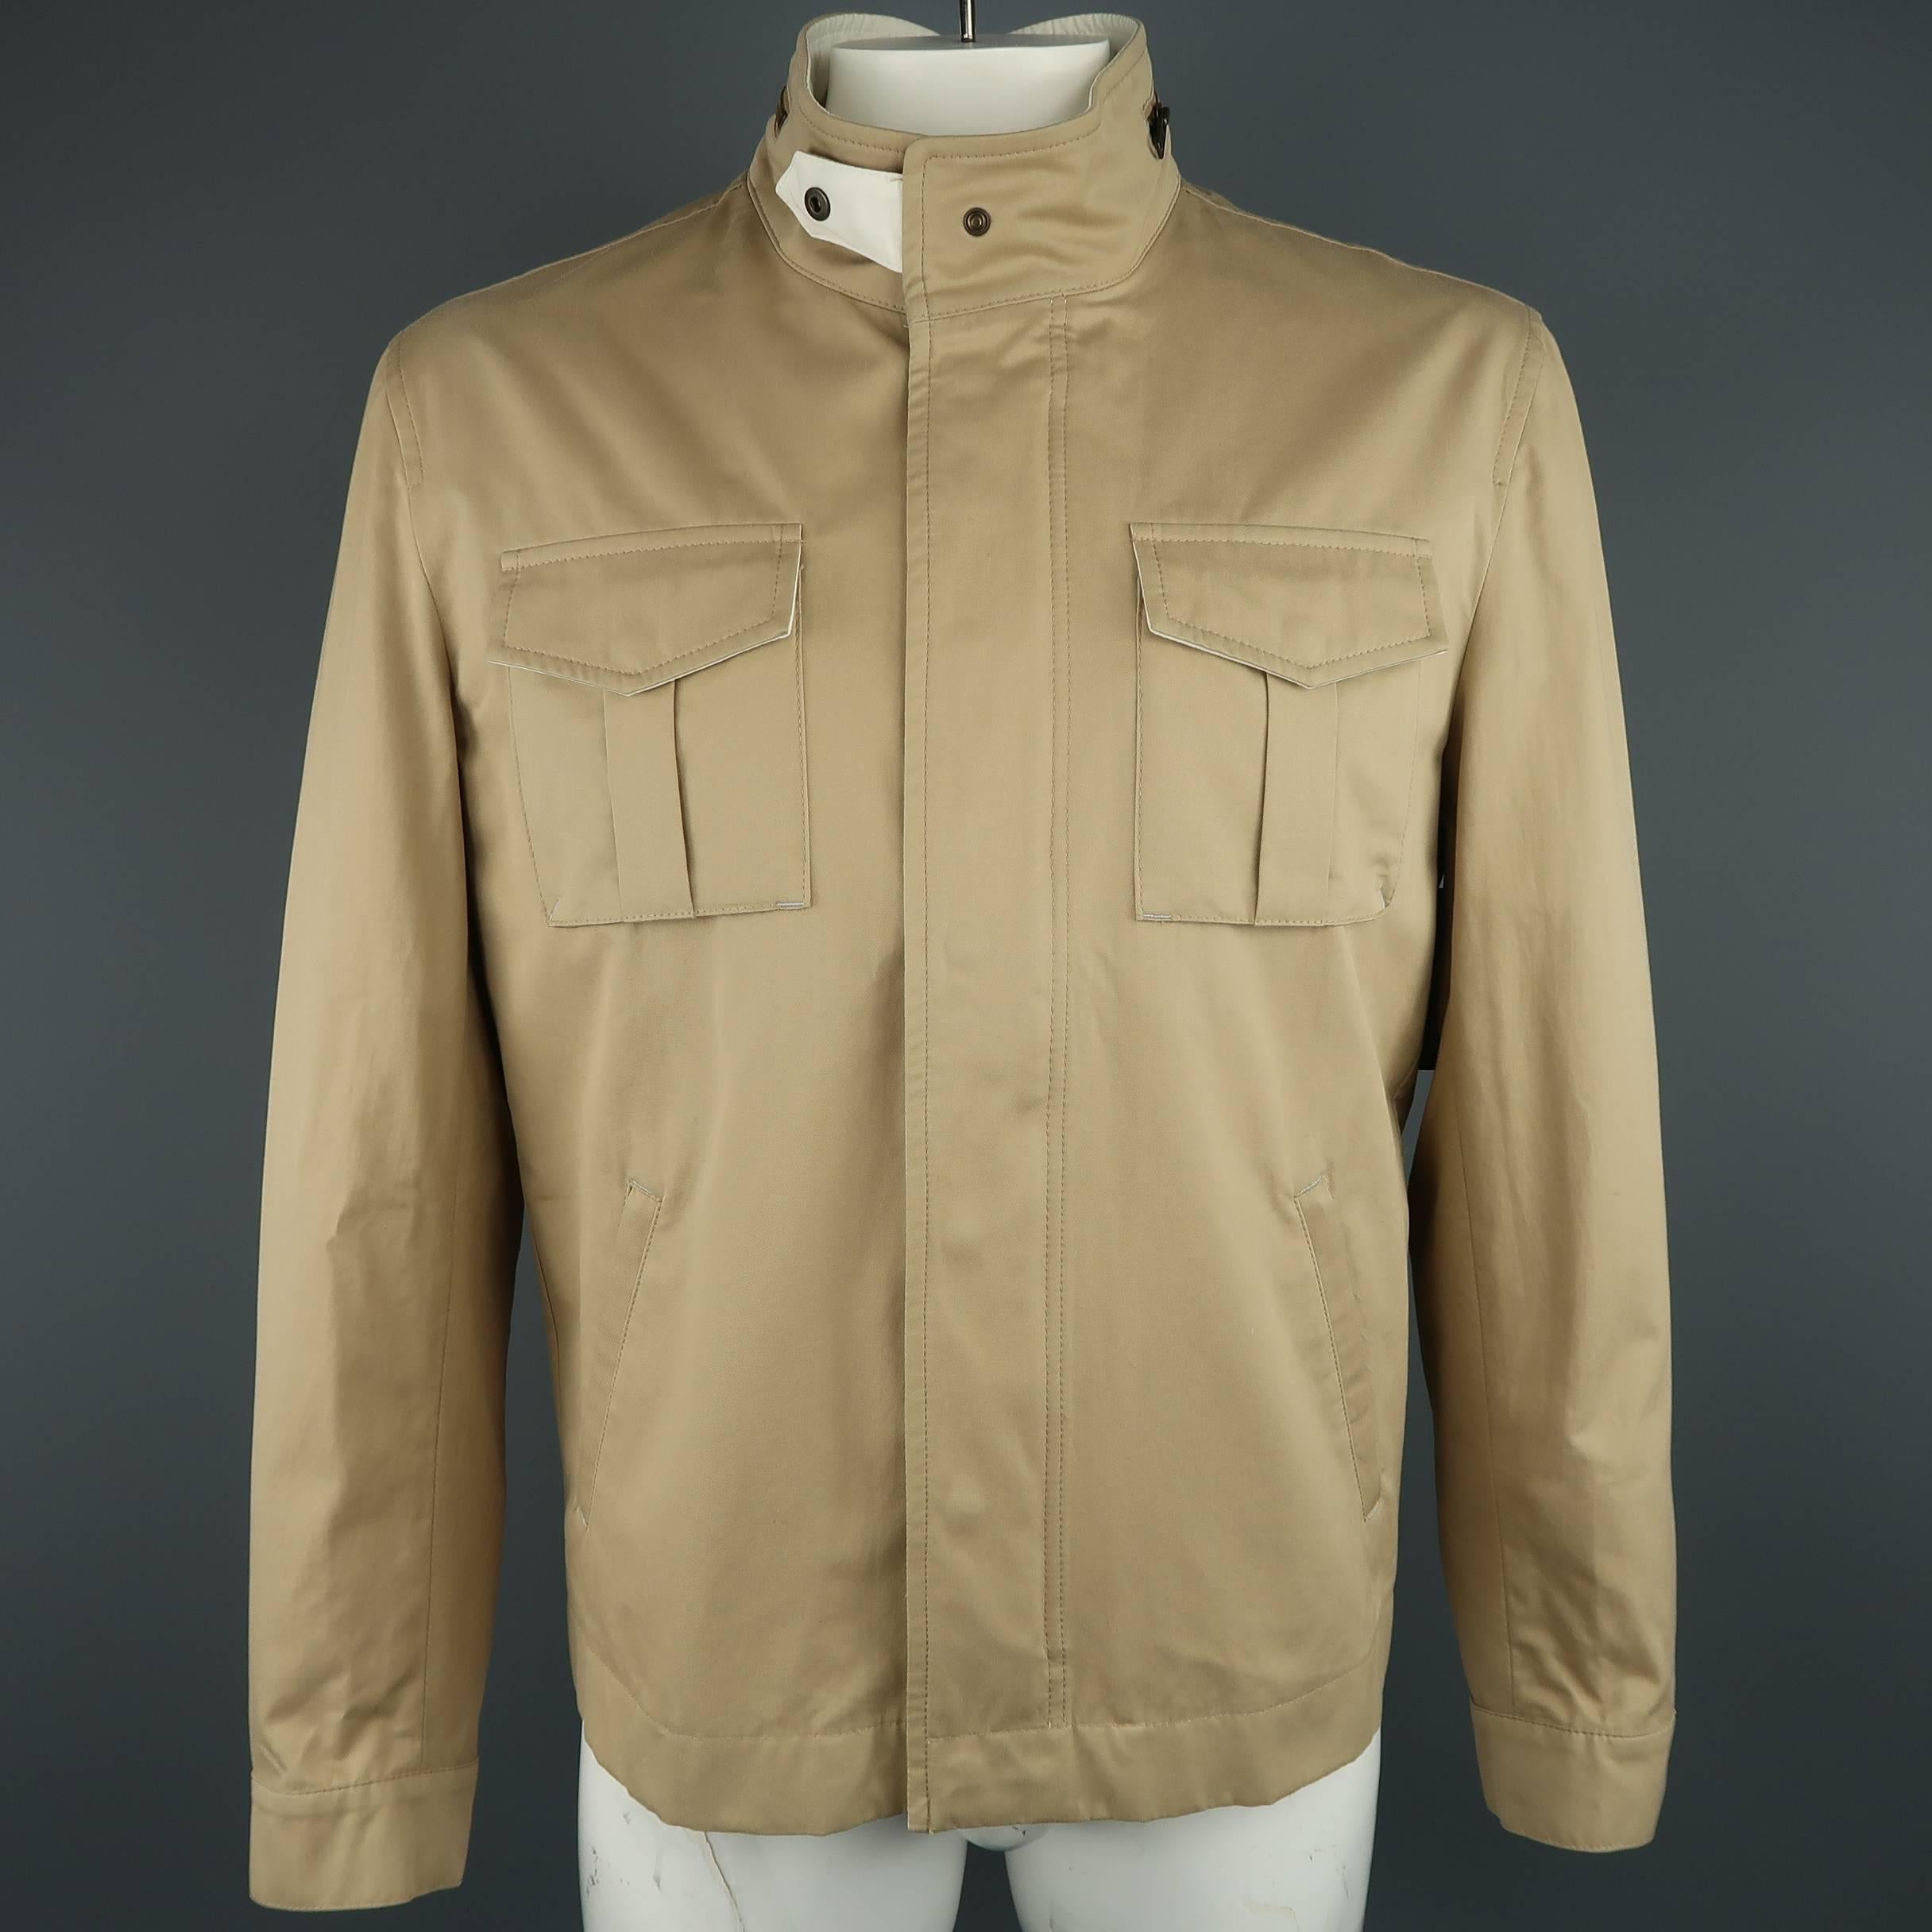 BRUNELLO CUCINELLI jacket comes in khaki cotton twill and features a stand up collar with snap tab, hidden snap placket zip closure, patch flap military pockets, slanted side pockets, optional zip out hood, and snap cuffs. Made in Italy.
 
New with